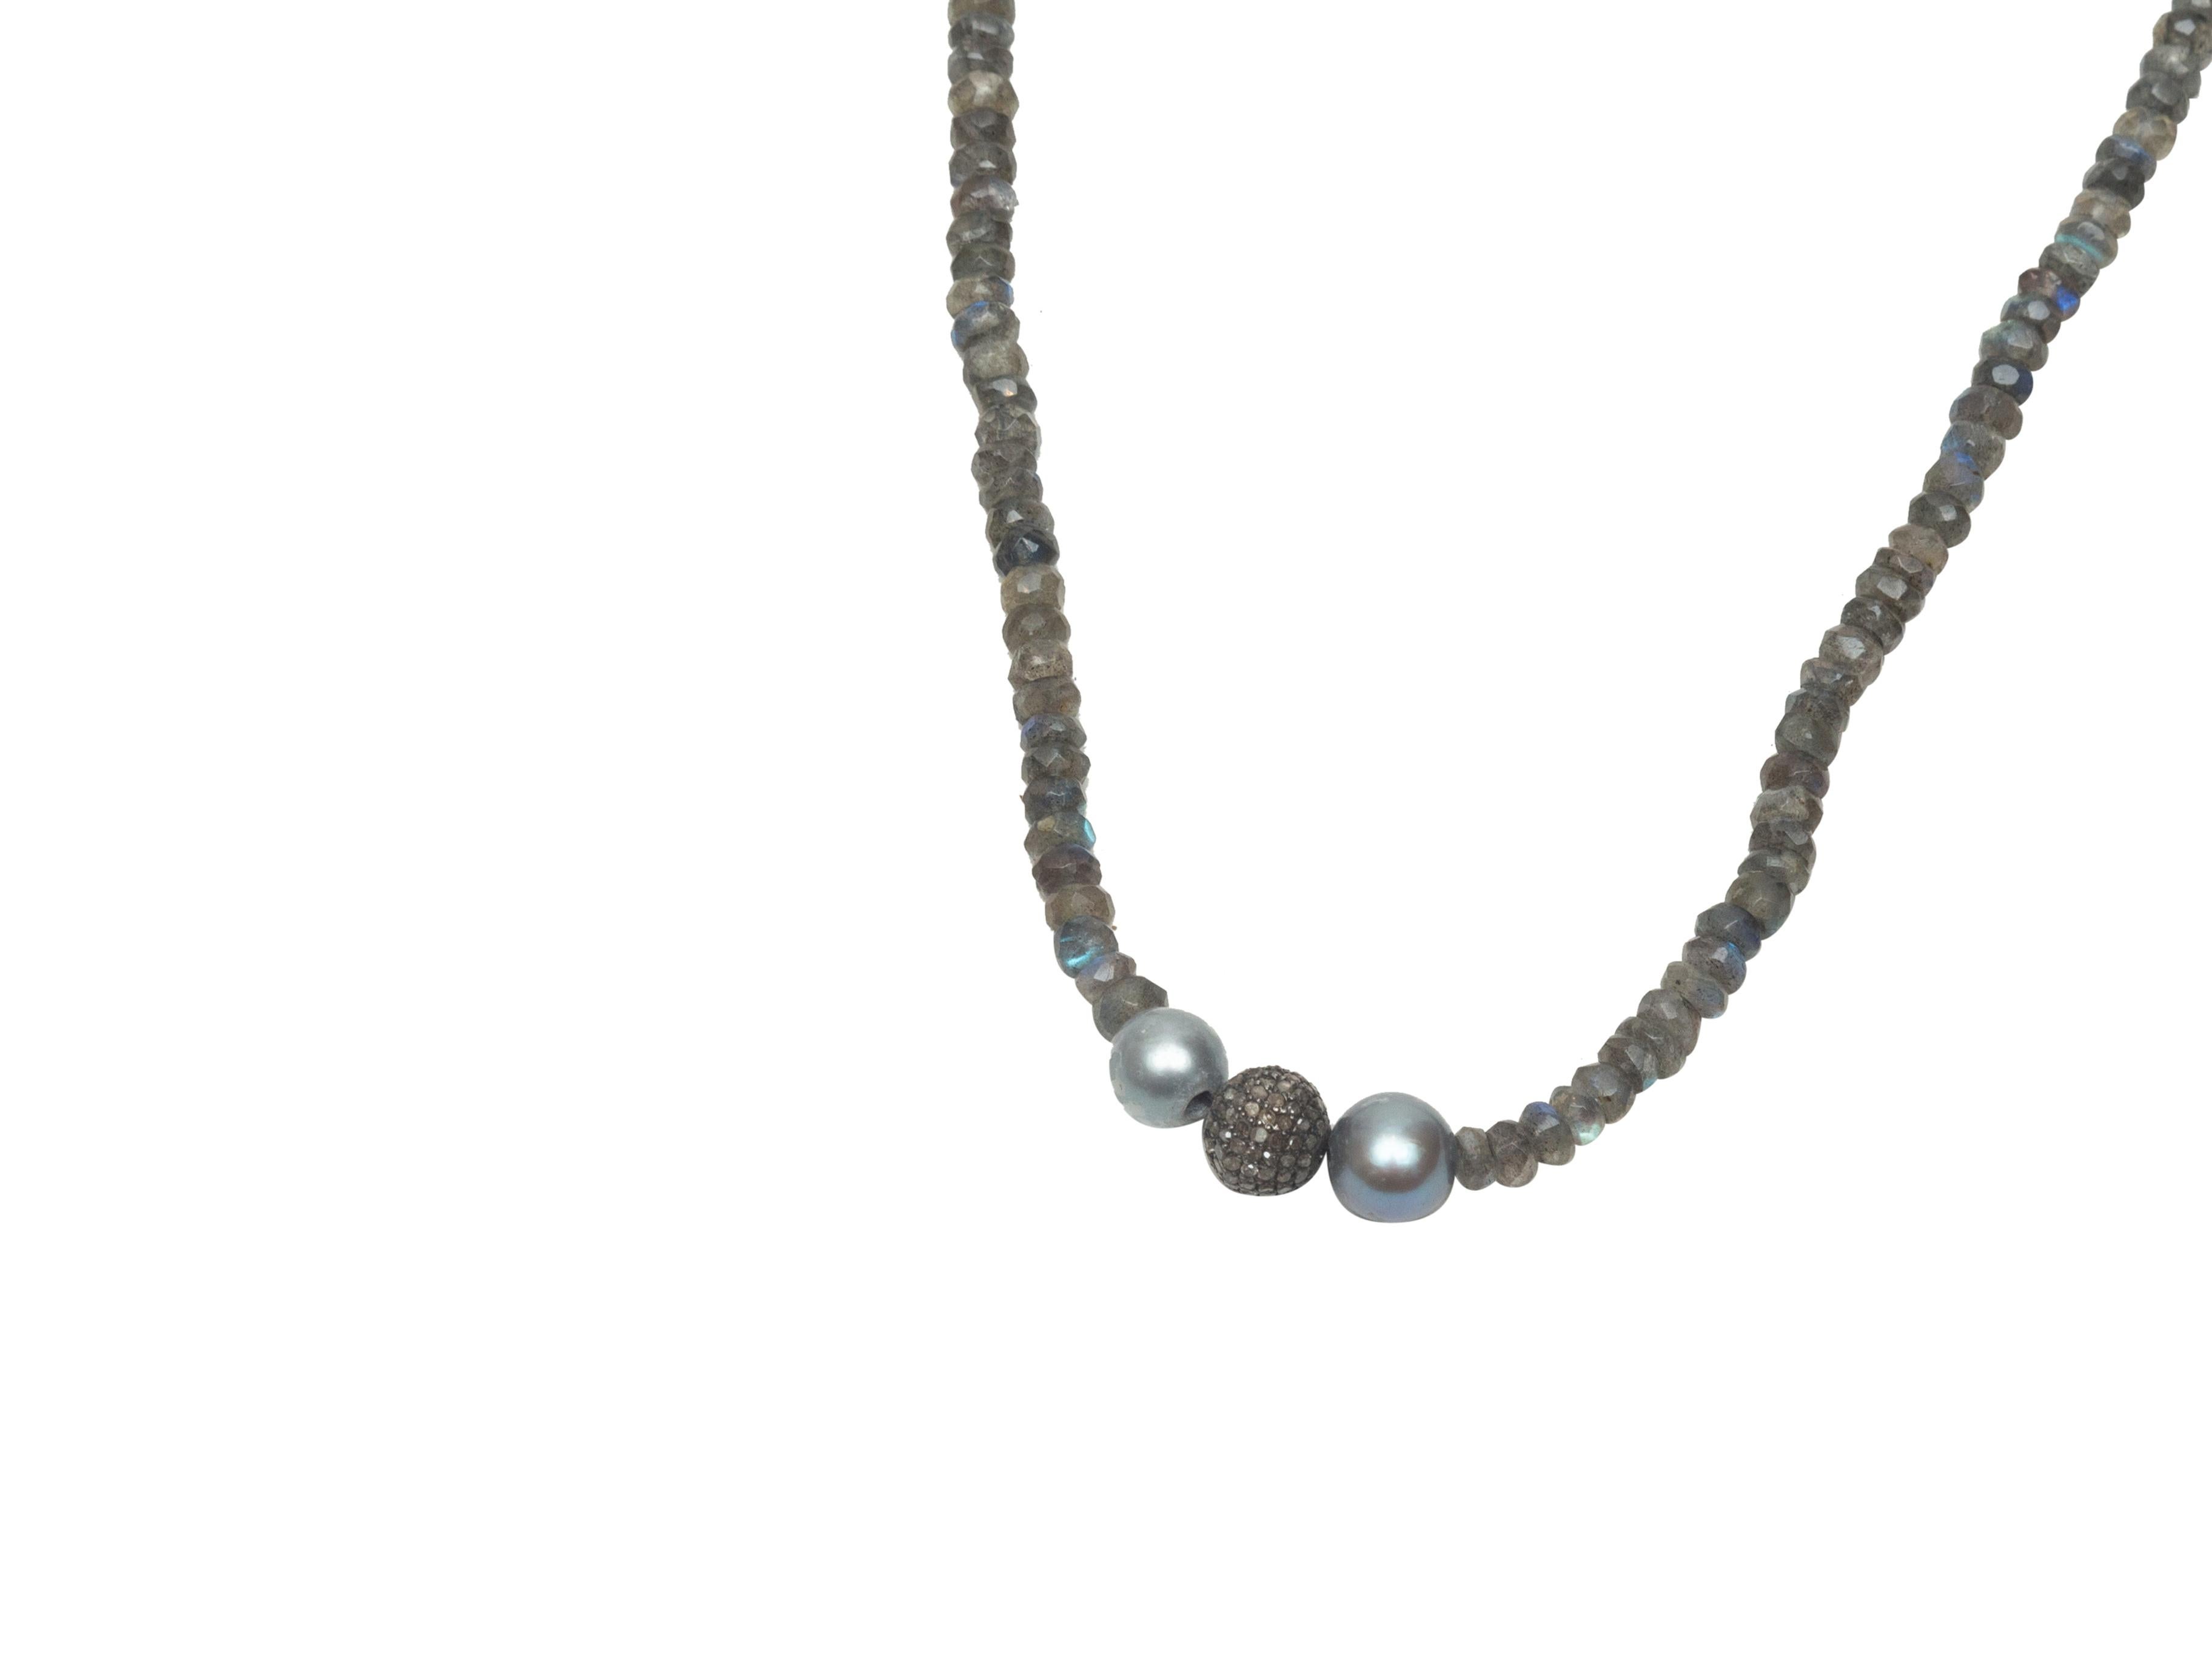 Product details: Grey and blue labradorite bead, pearl and champagne diamond strand necklace by Bavna. 36